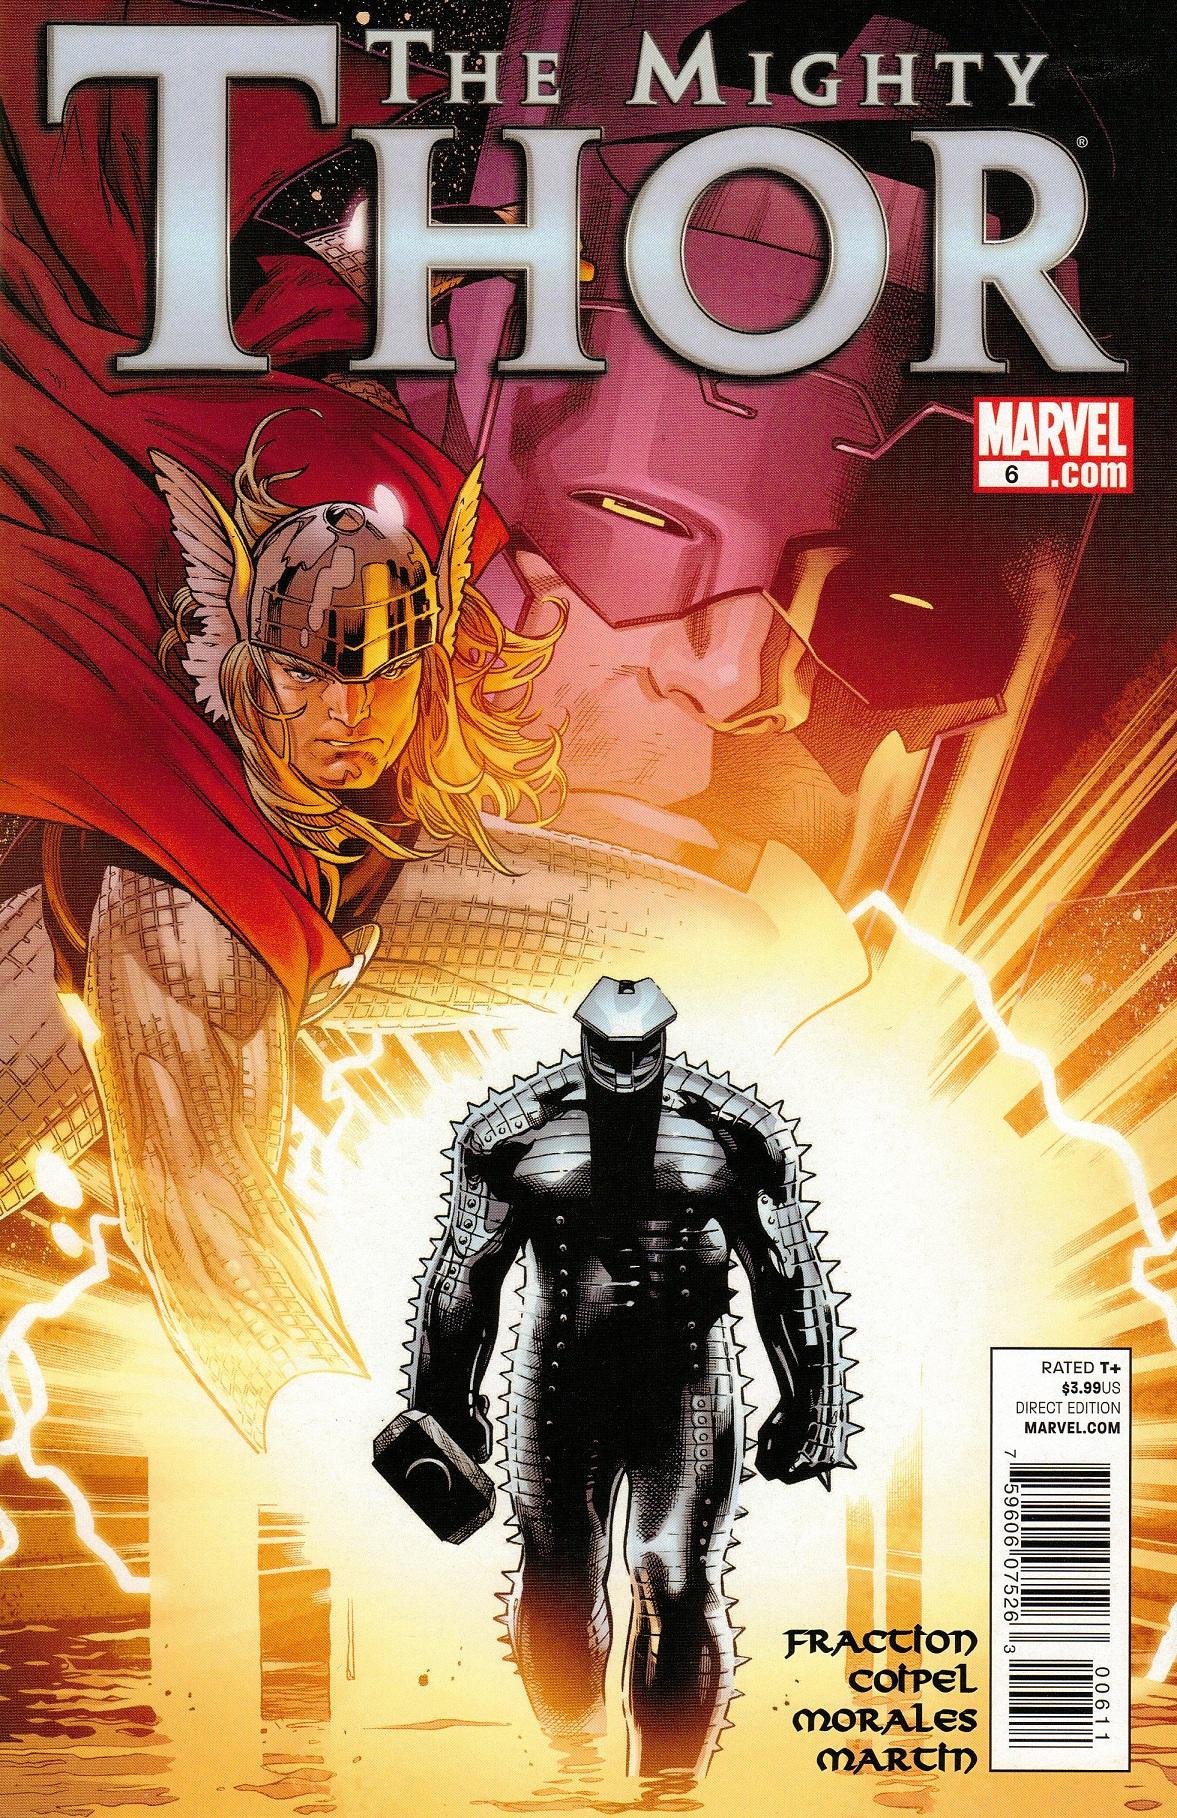 The Mighty Thor Vol. 1 #6